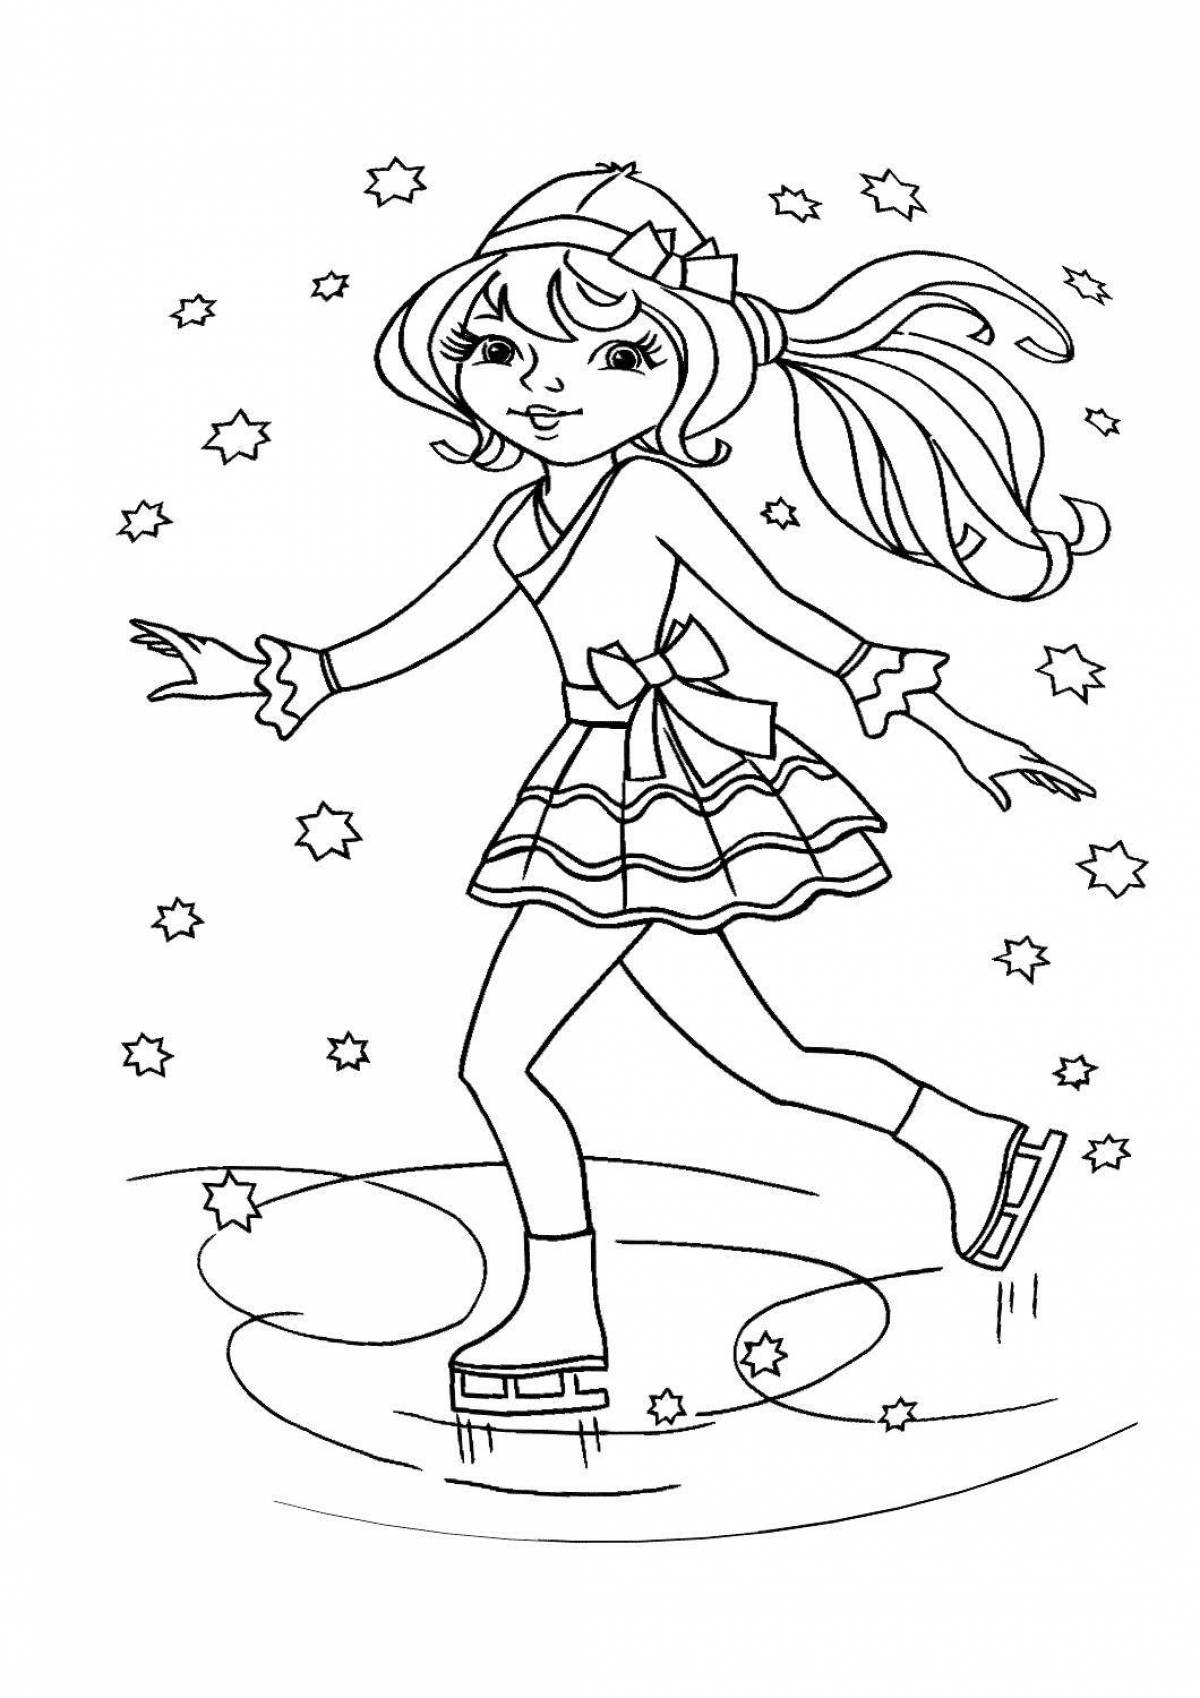 Fabulous figure skating coloring pages for kids